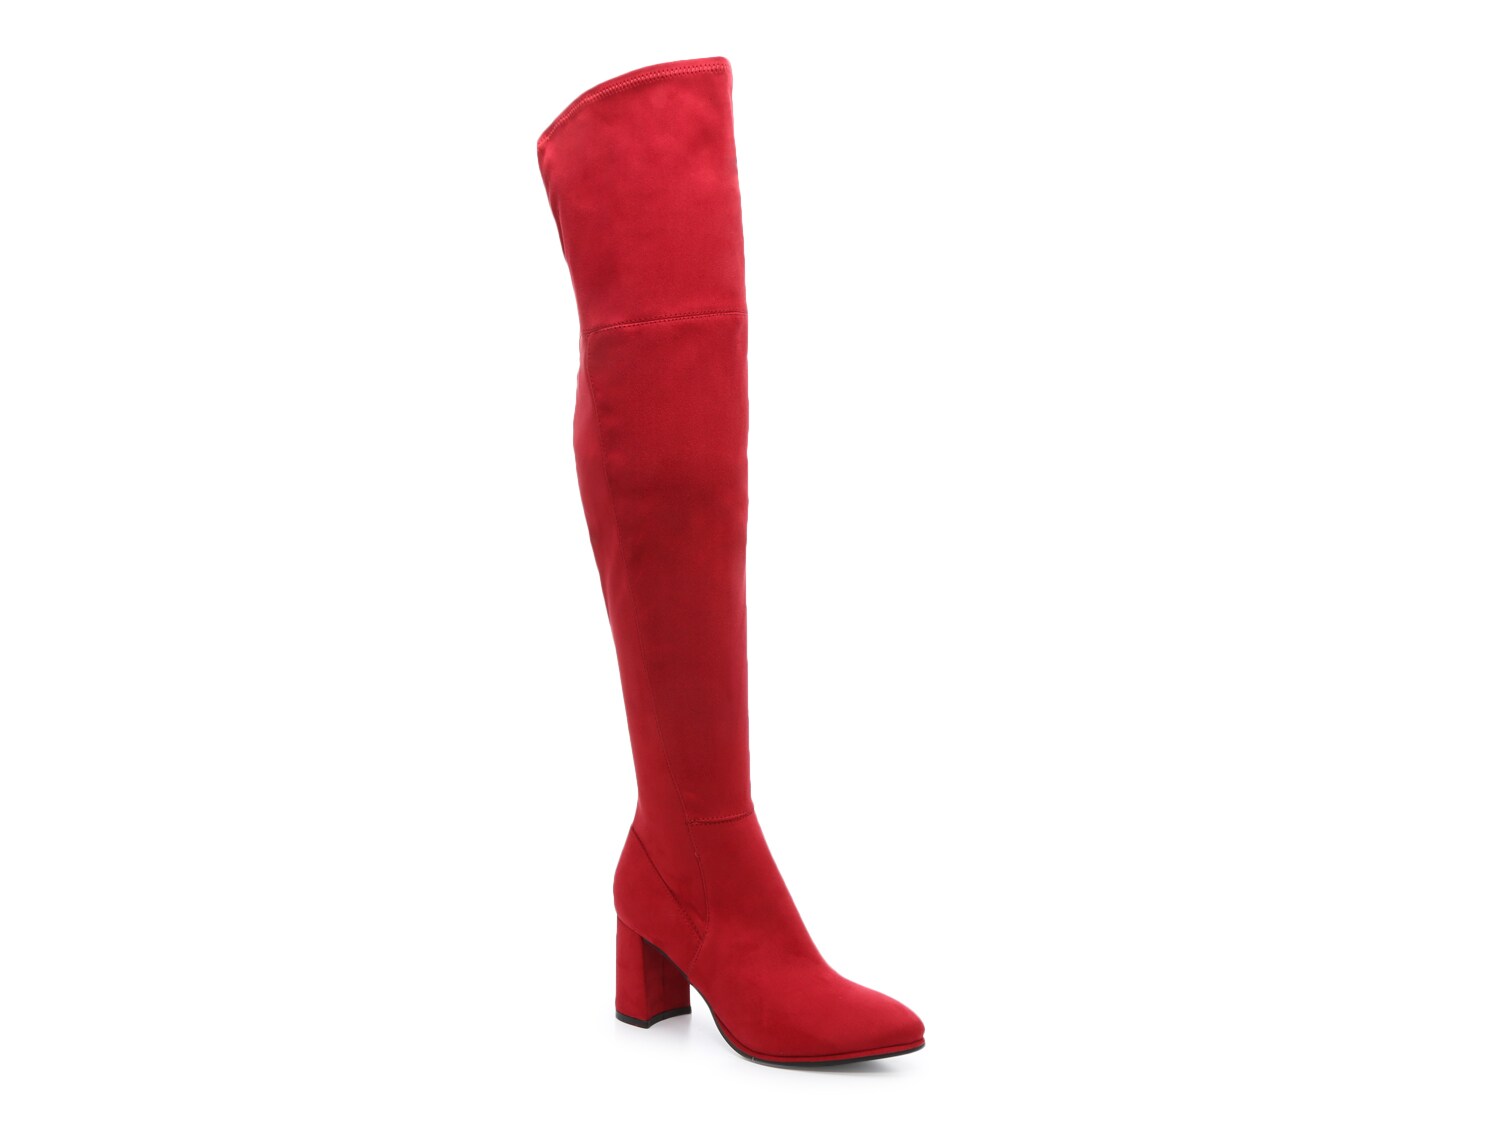 The Knee \u0026 Thigh High Boots | DSW